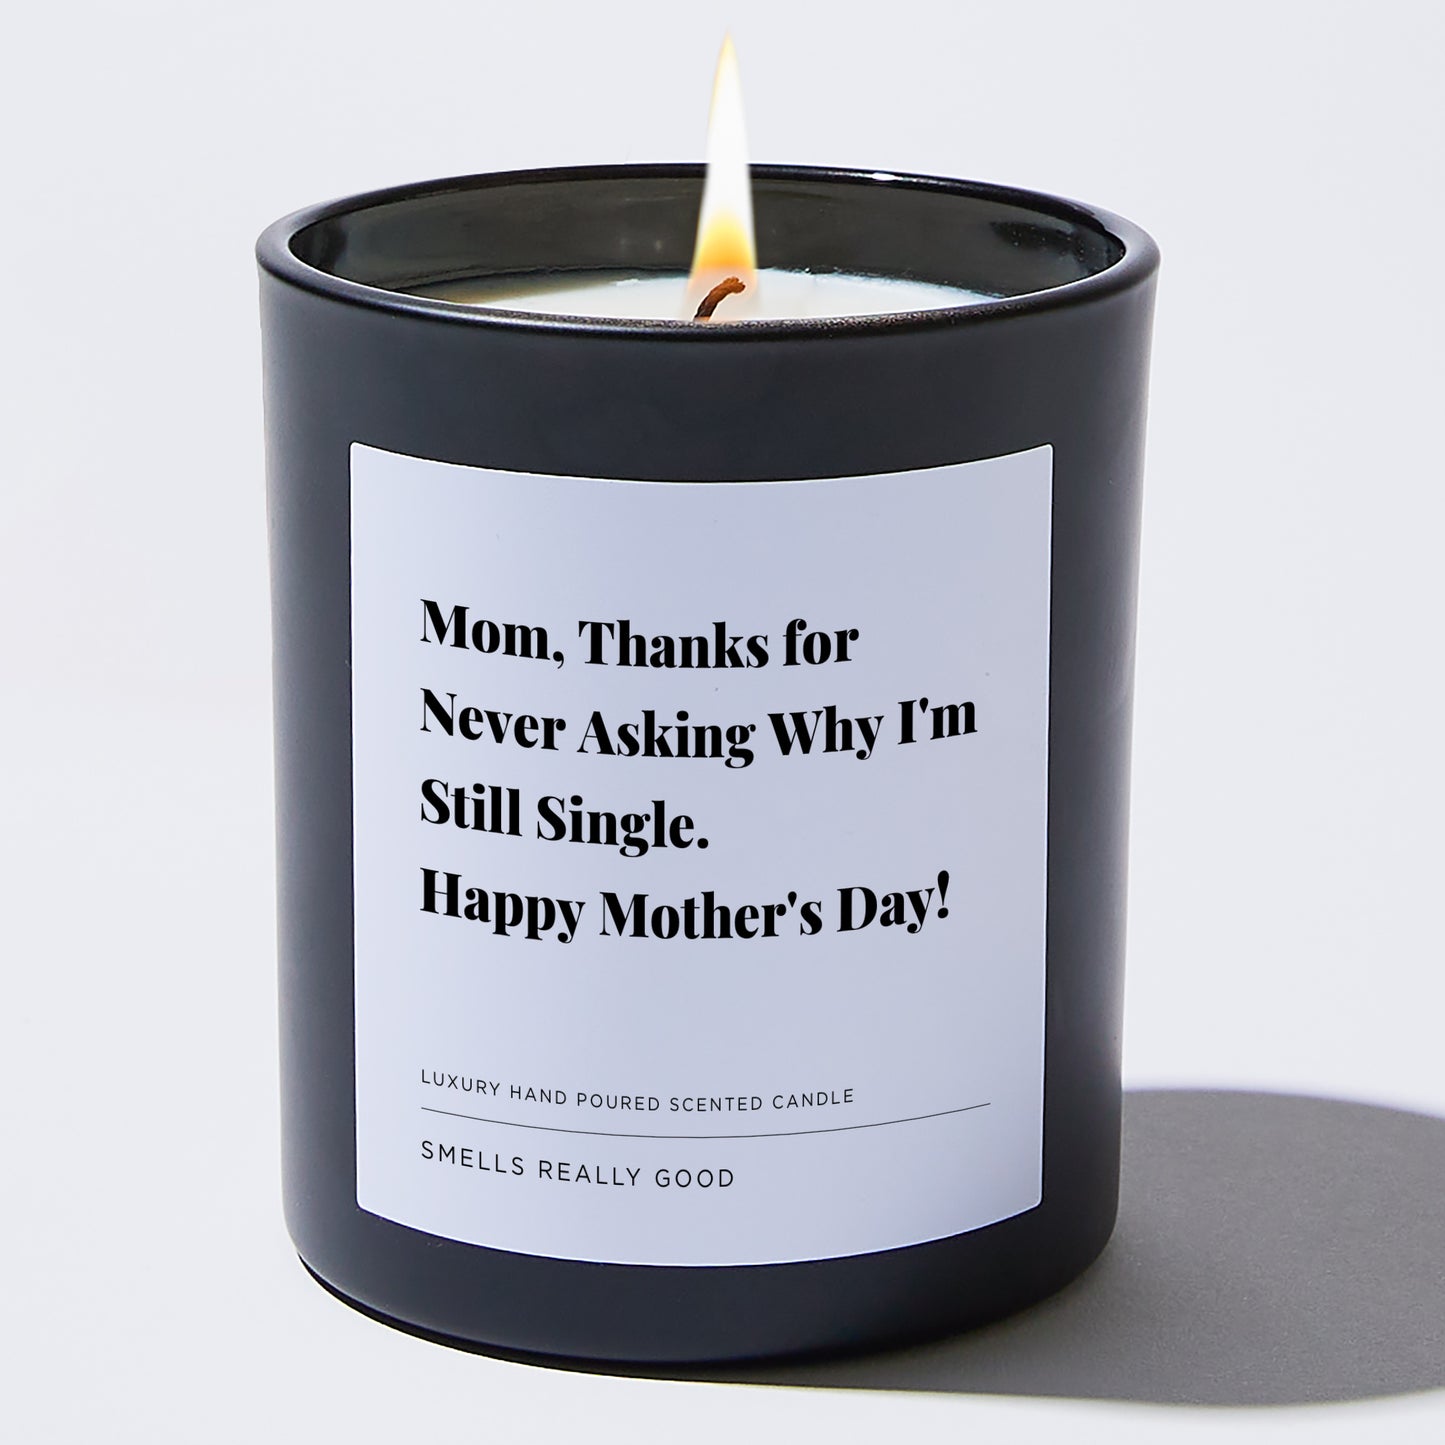 Gift for Mom - Mom, thanks for never asking why I'm still single. Happy Mother's Day! - Candle